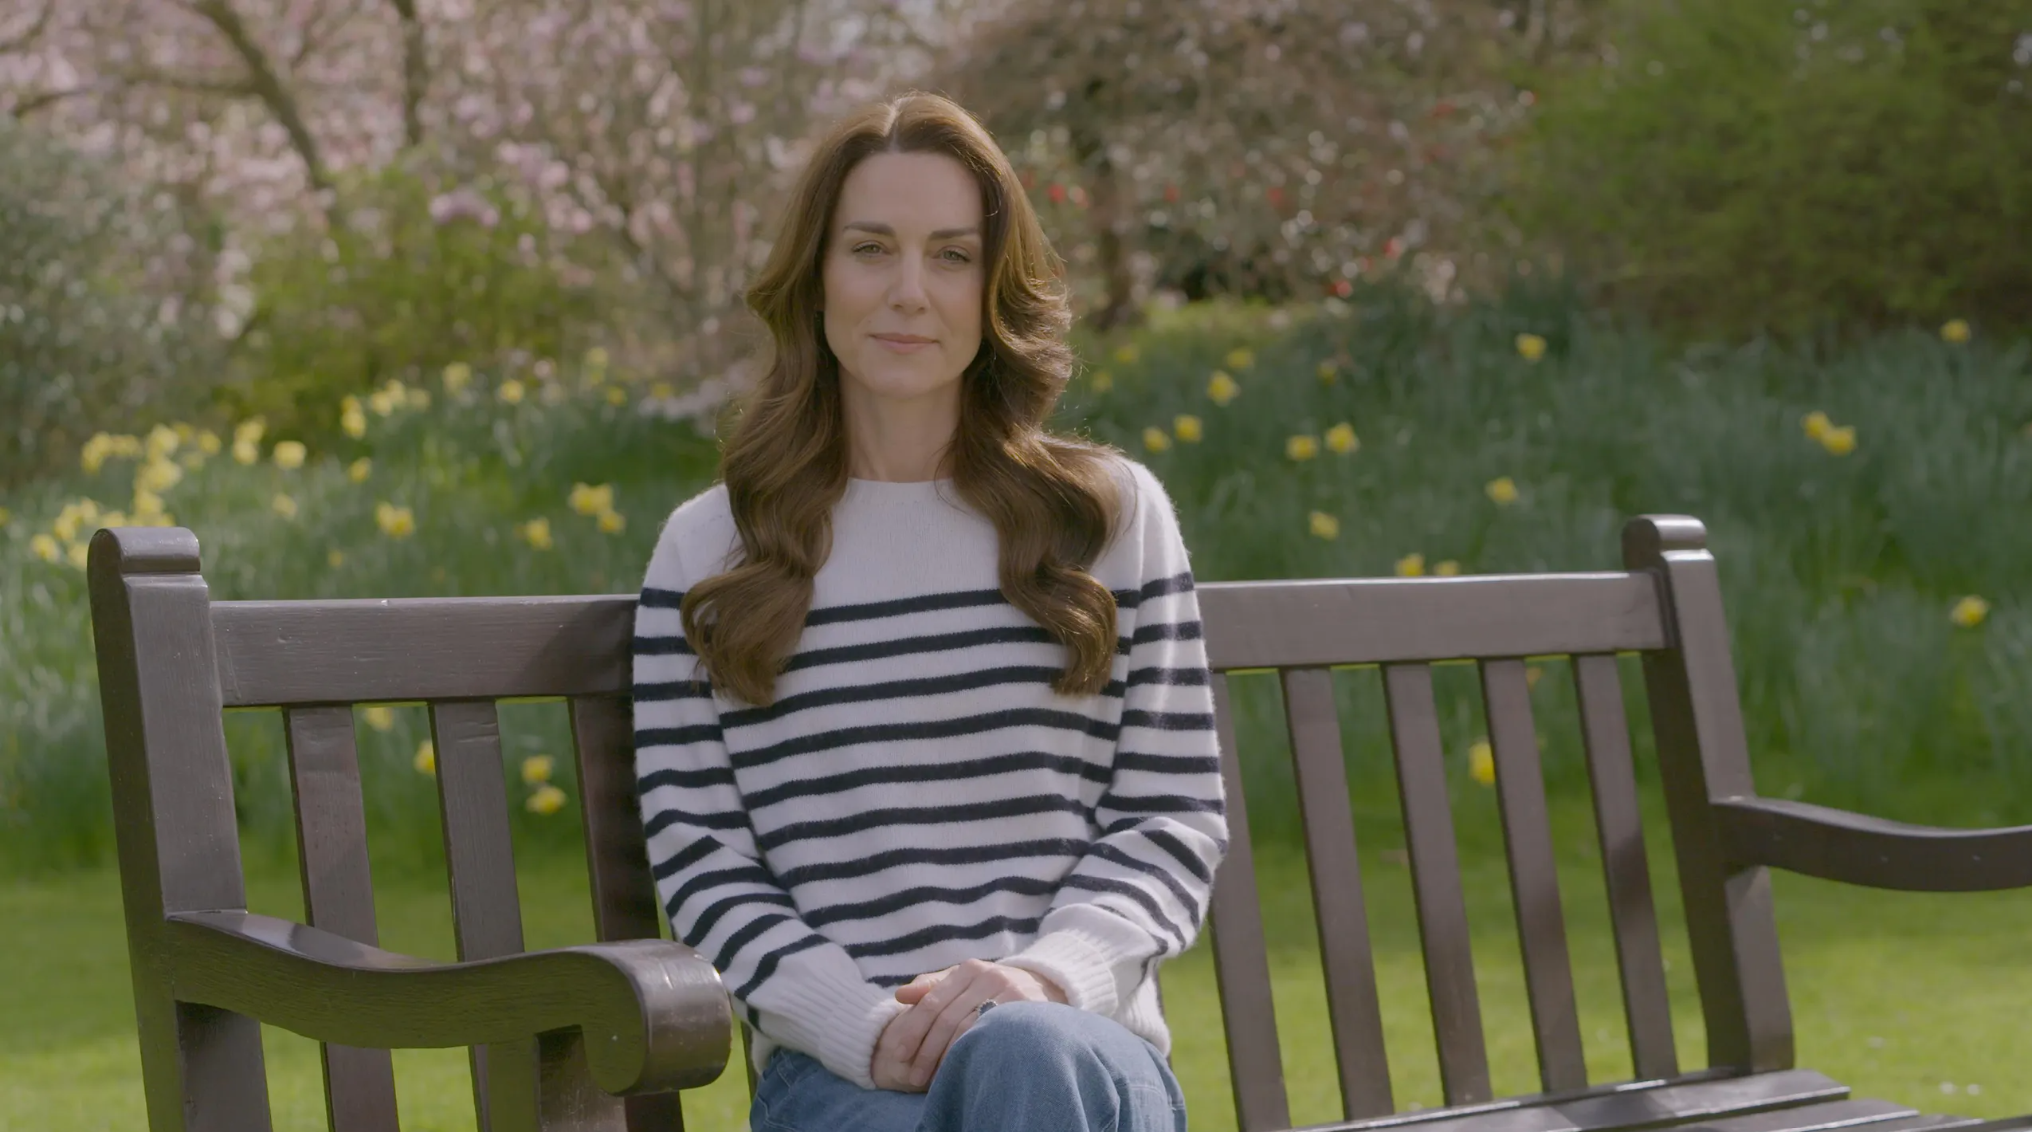 kensington palace has provided an update on kate middleton